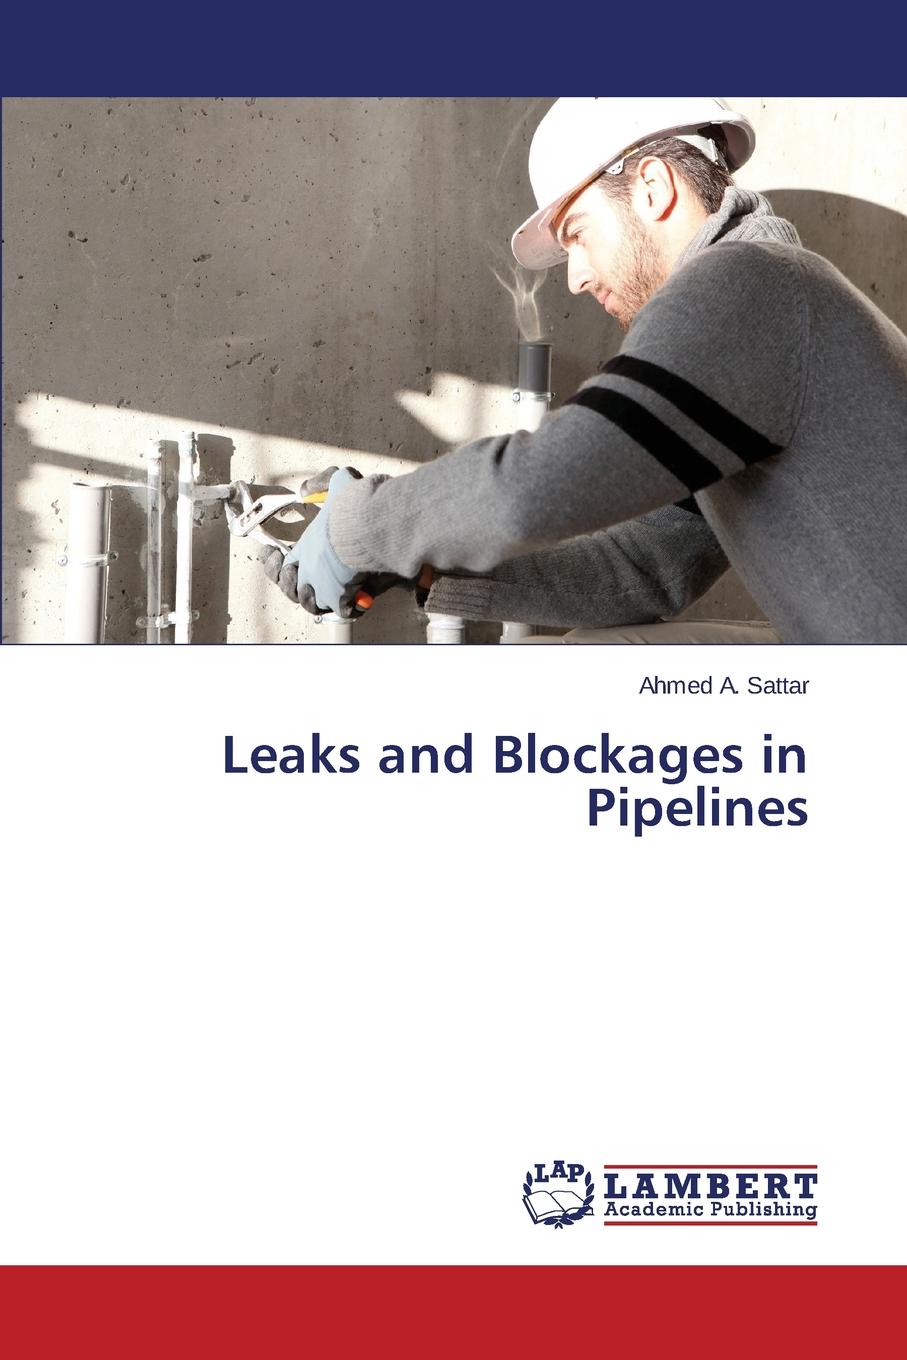 A. Sattar Ahmed Leaks and Blockages in Pipelines